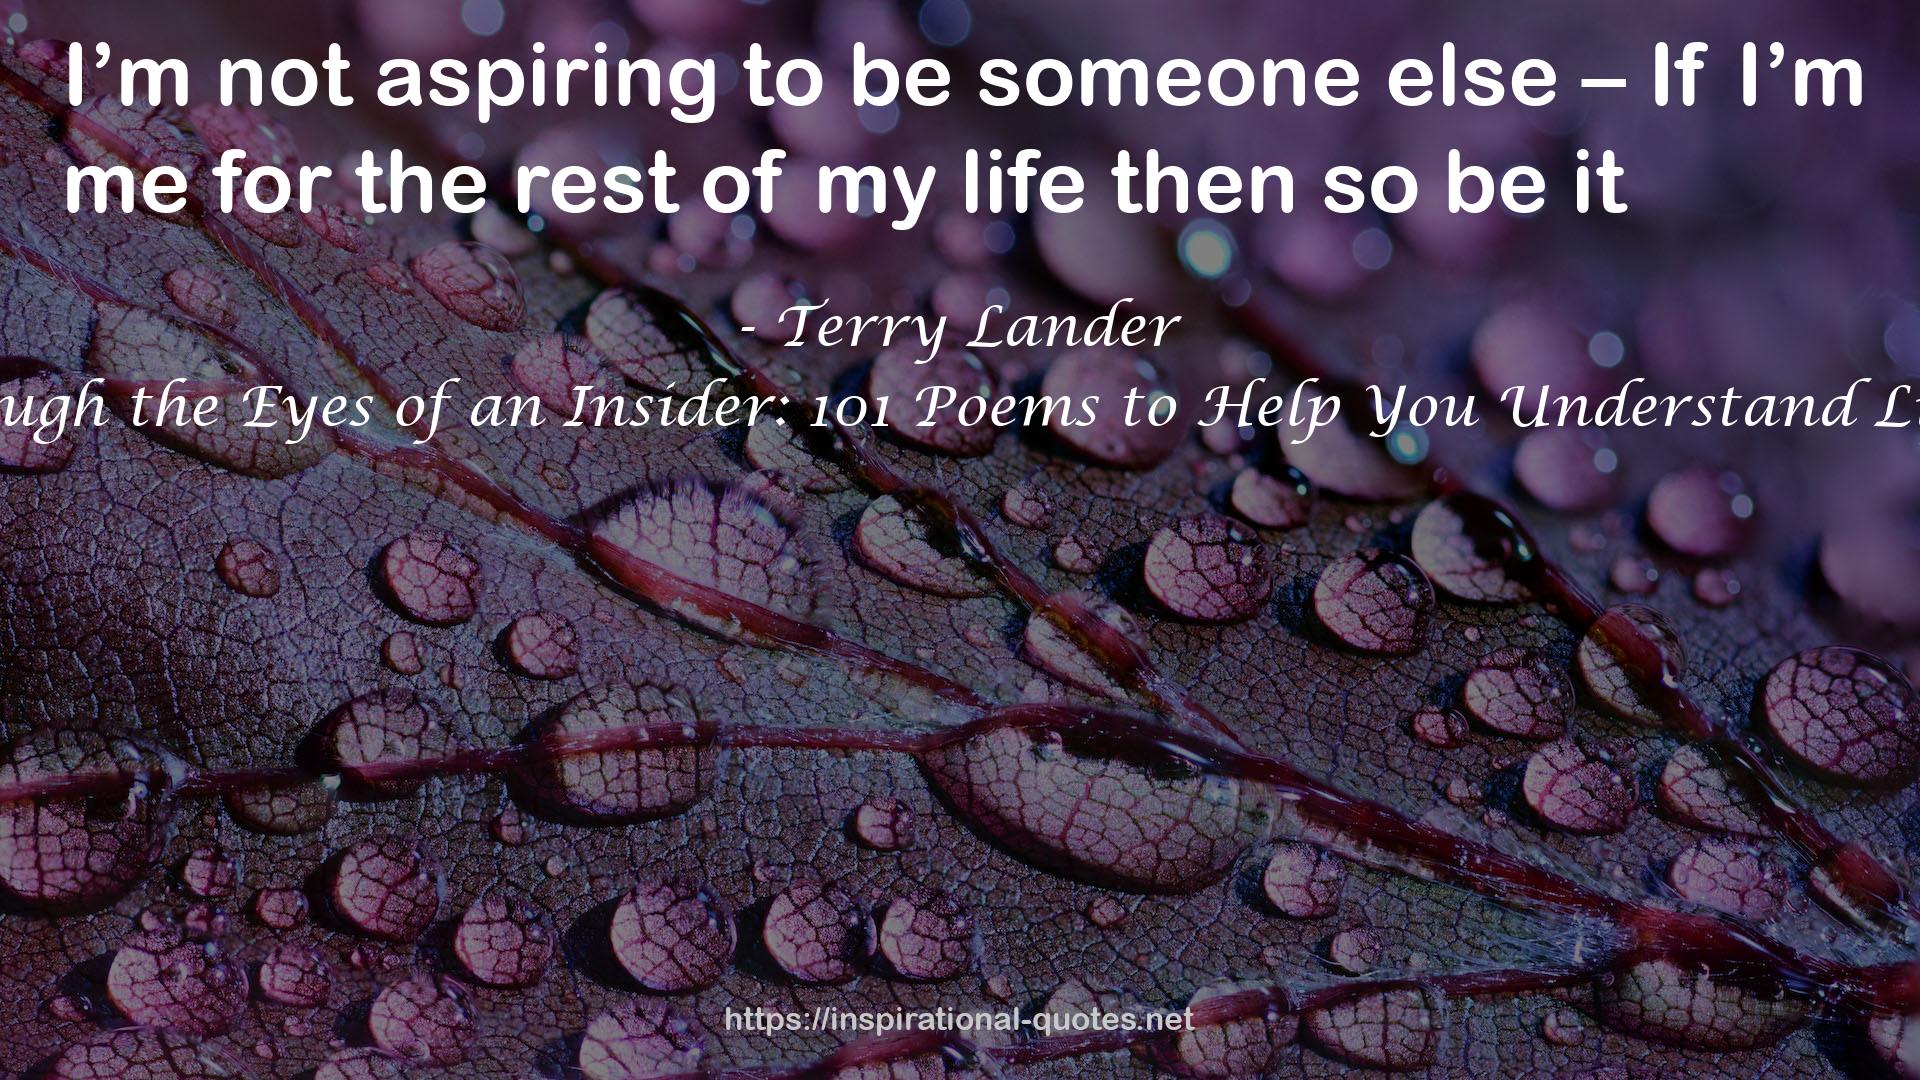 Life Through the Eyes of an Insider: 101 Poems to Help You Understand Life Better QUOTES